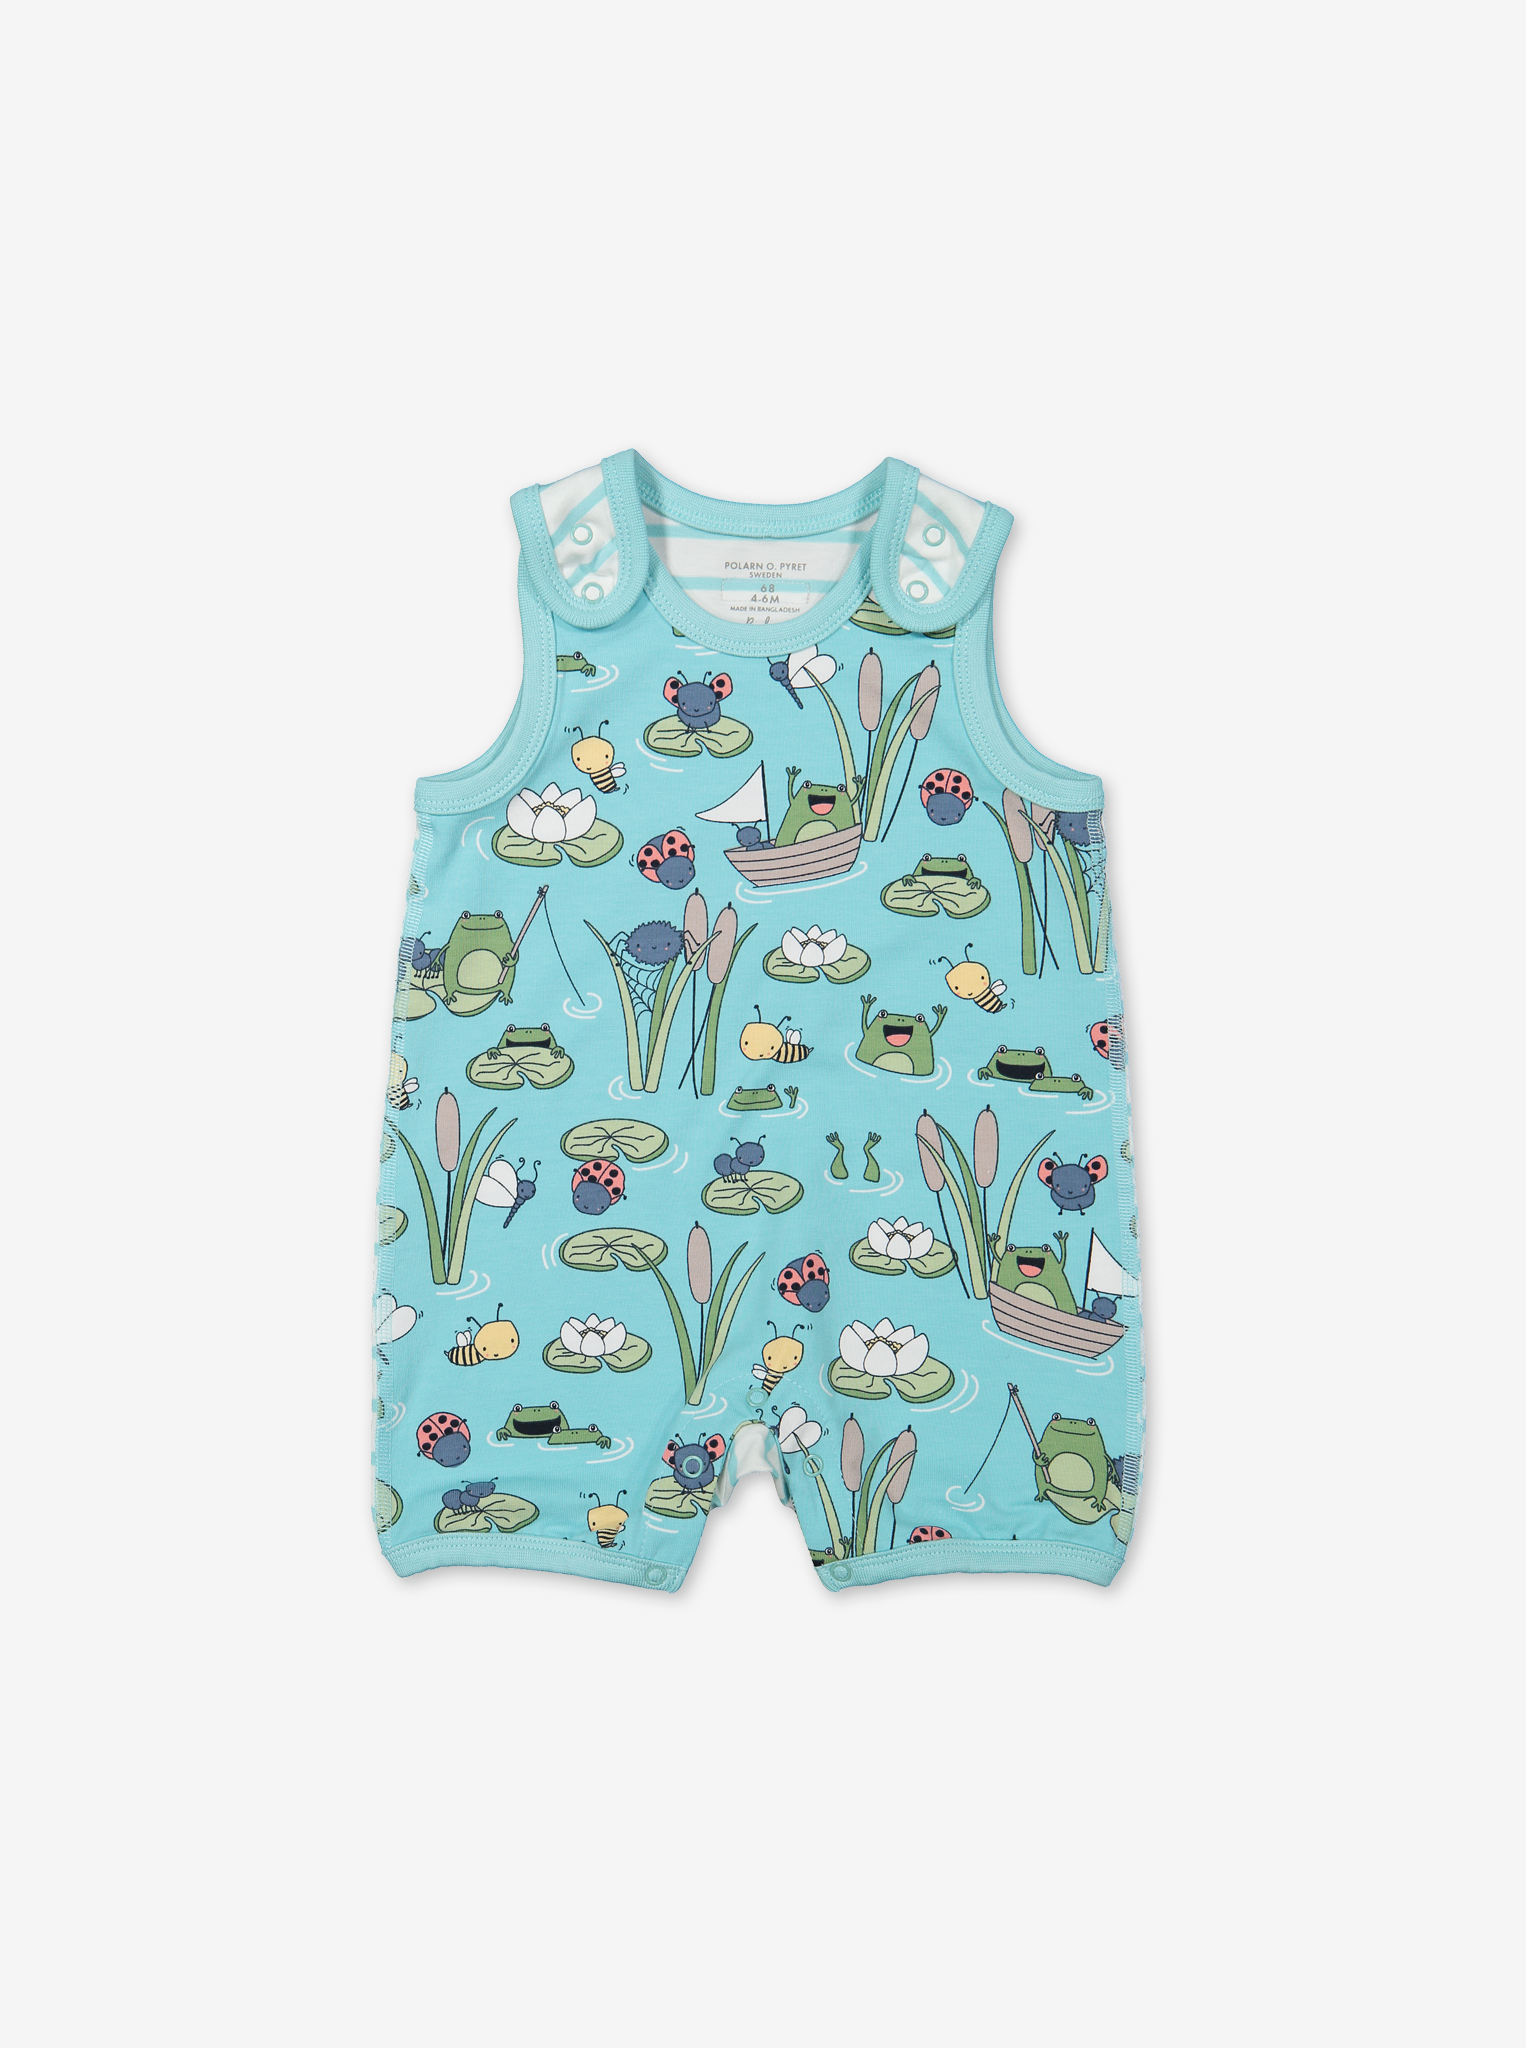 Pond Print Baby Playsuit-Unisex-0-1y-Turquoise